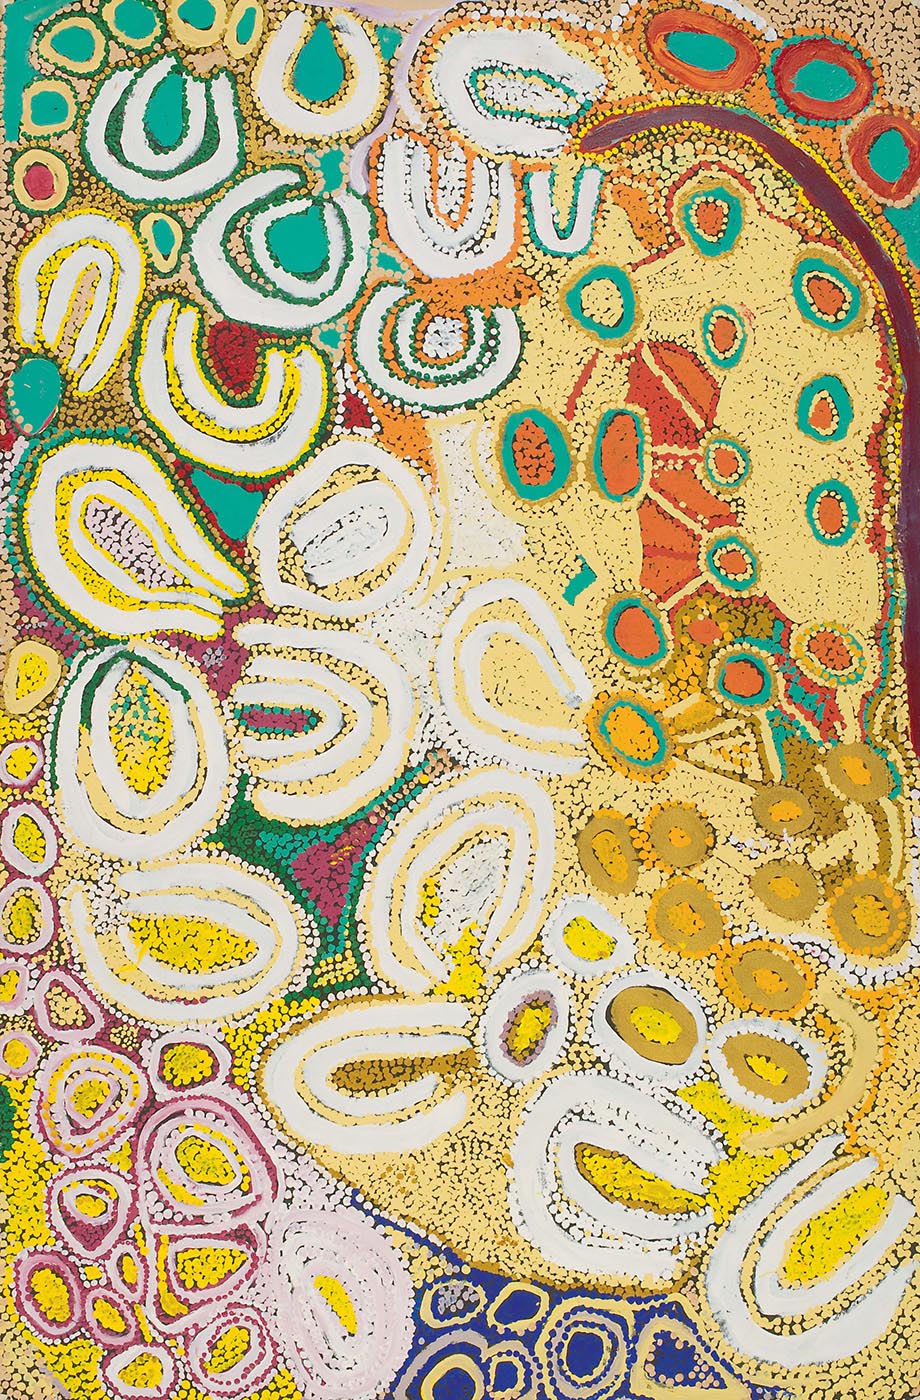 A textured acrylic painting on linen canvas with a curve of white concentric U shapes flowing from the lower left corner to the top right with a dotted background of pink, purple, yellow, red and green. In the top left are 17 variously sized oval-shaped concentric rings close together with yellow and green dots around them. The bottom right has a purple curved line with three green circles with orange, red and brown borders below it. In the lower central area there are circles in green with dotted orange centres and yellow circles with brown edges connected by lines on a background of cream, orange, yellow and brown dots. - click to view larger image